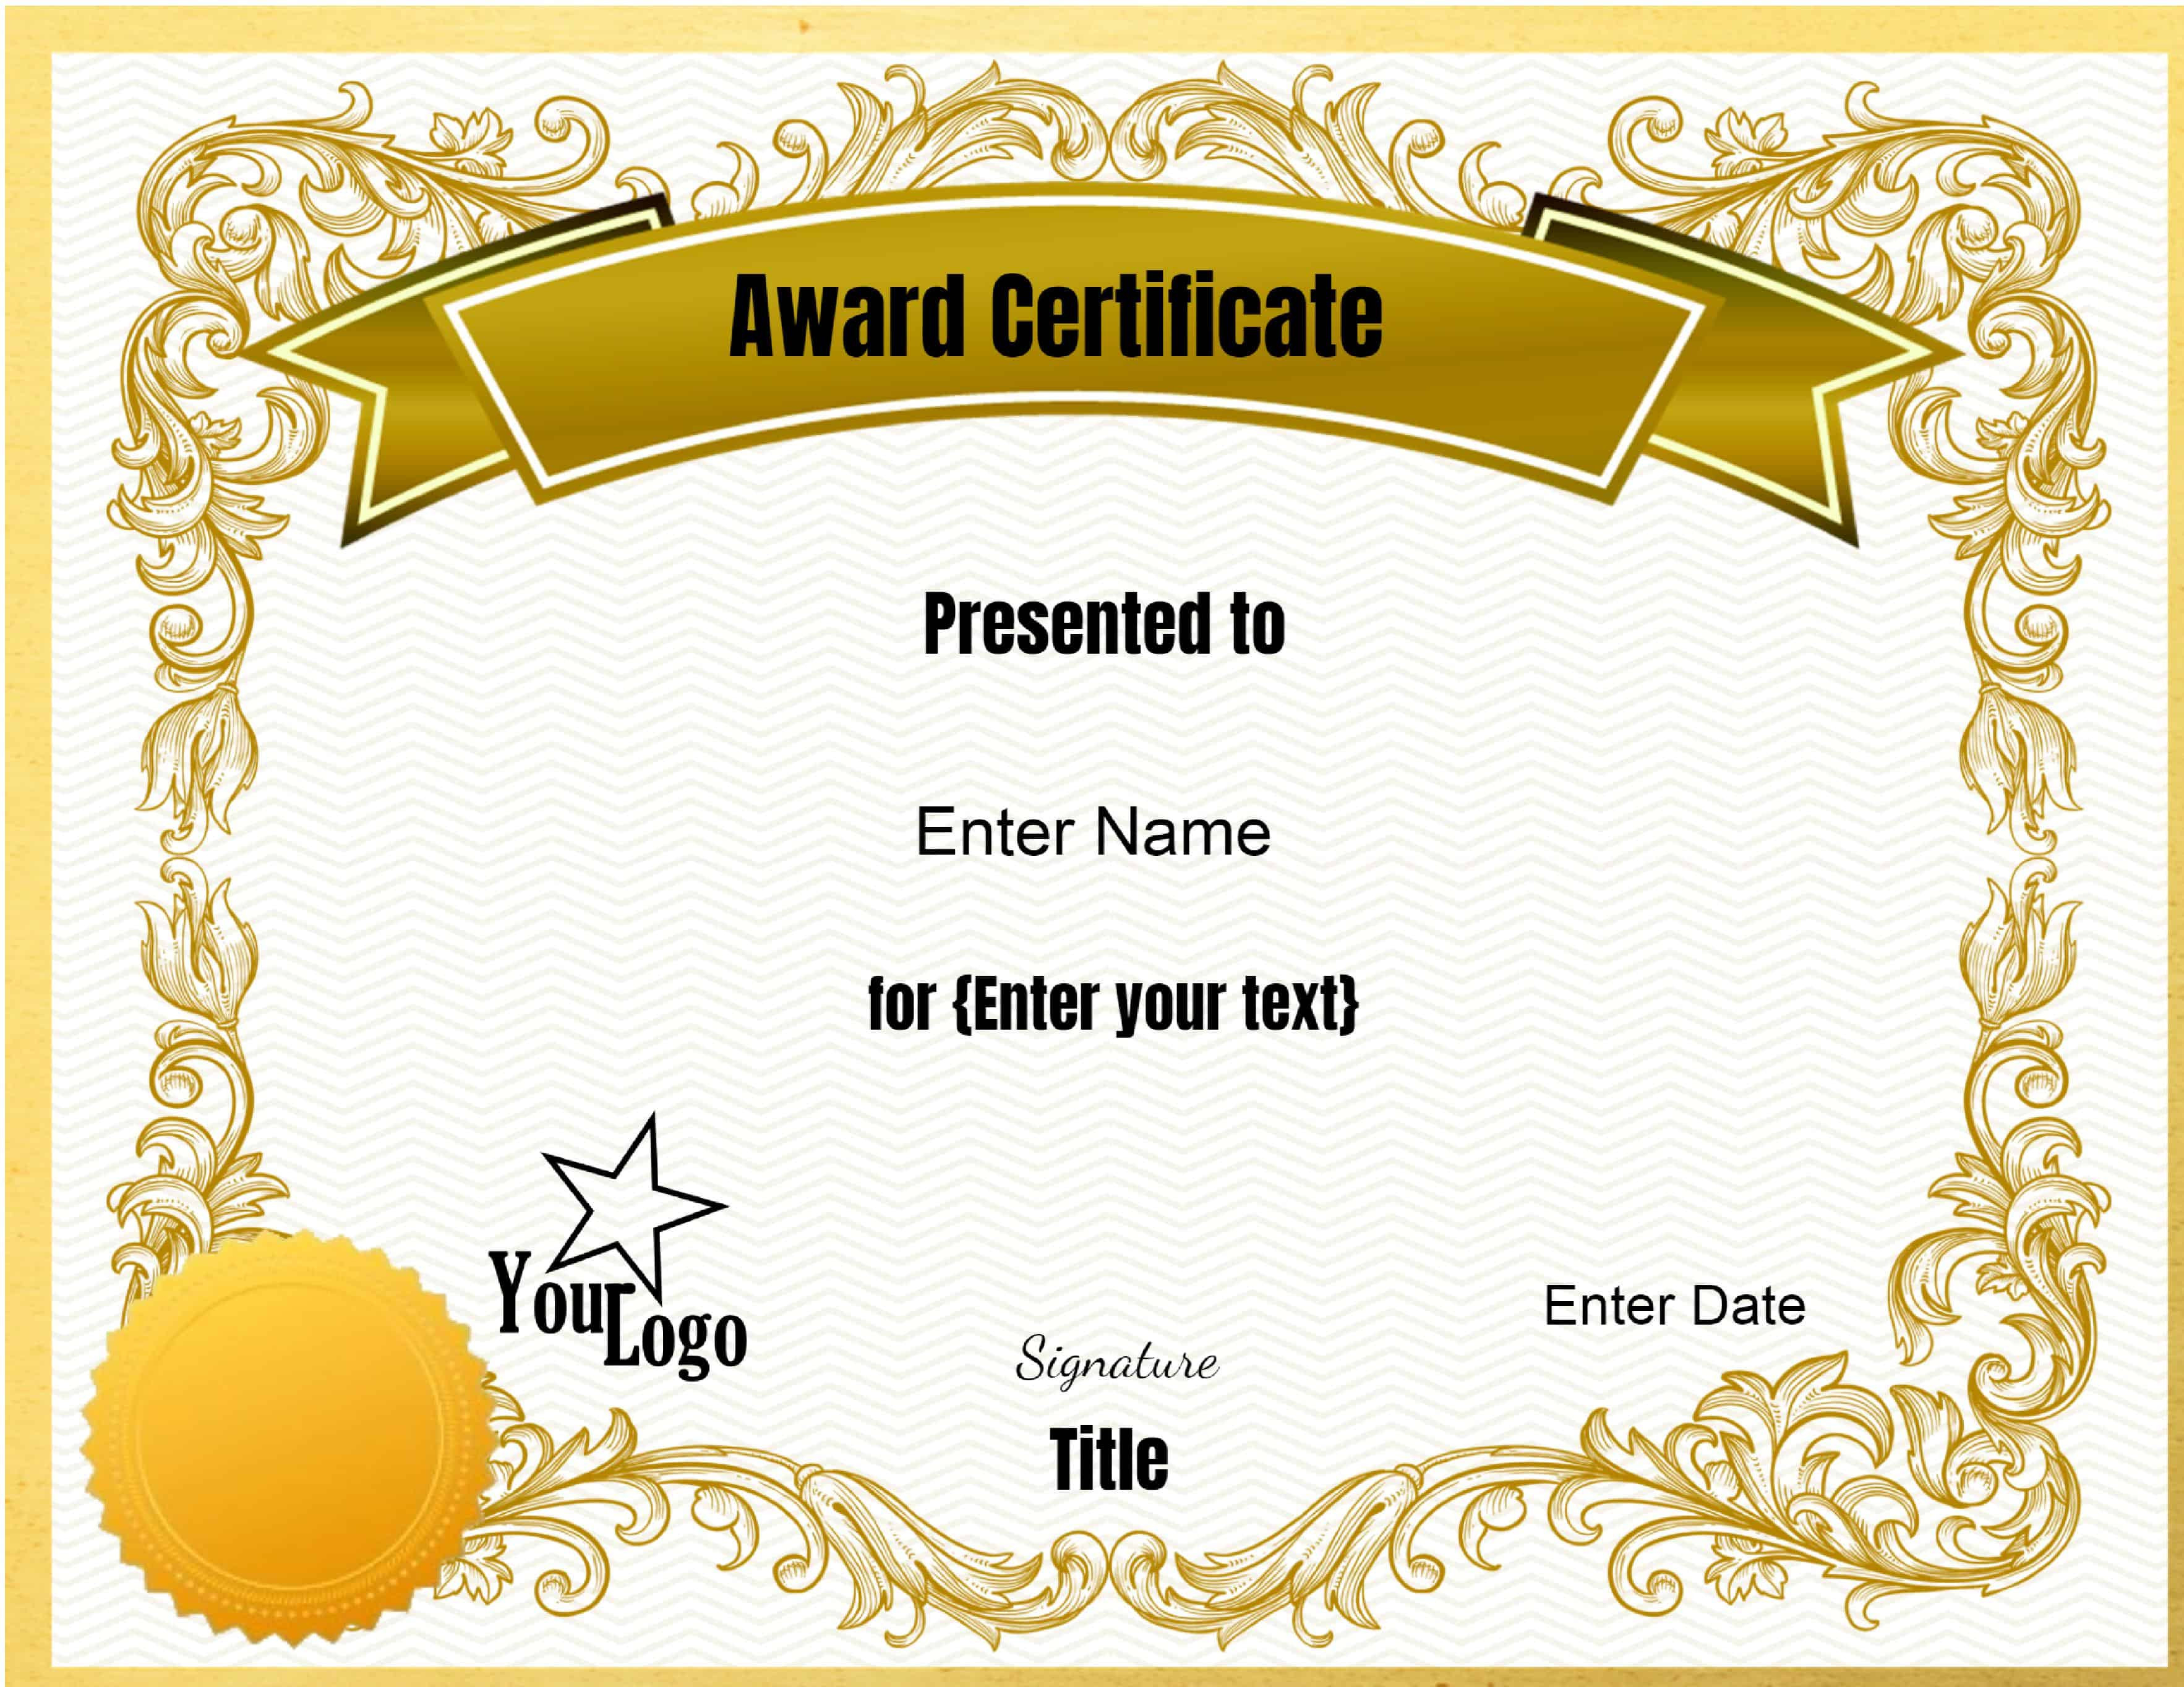 Free Templates For Certificates | Dattstar Within Best Employee Award Certificate Templates